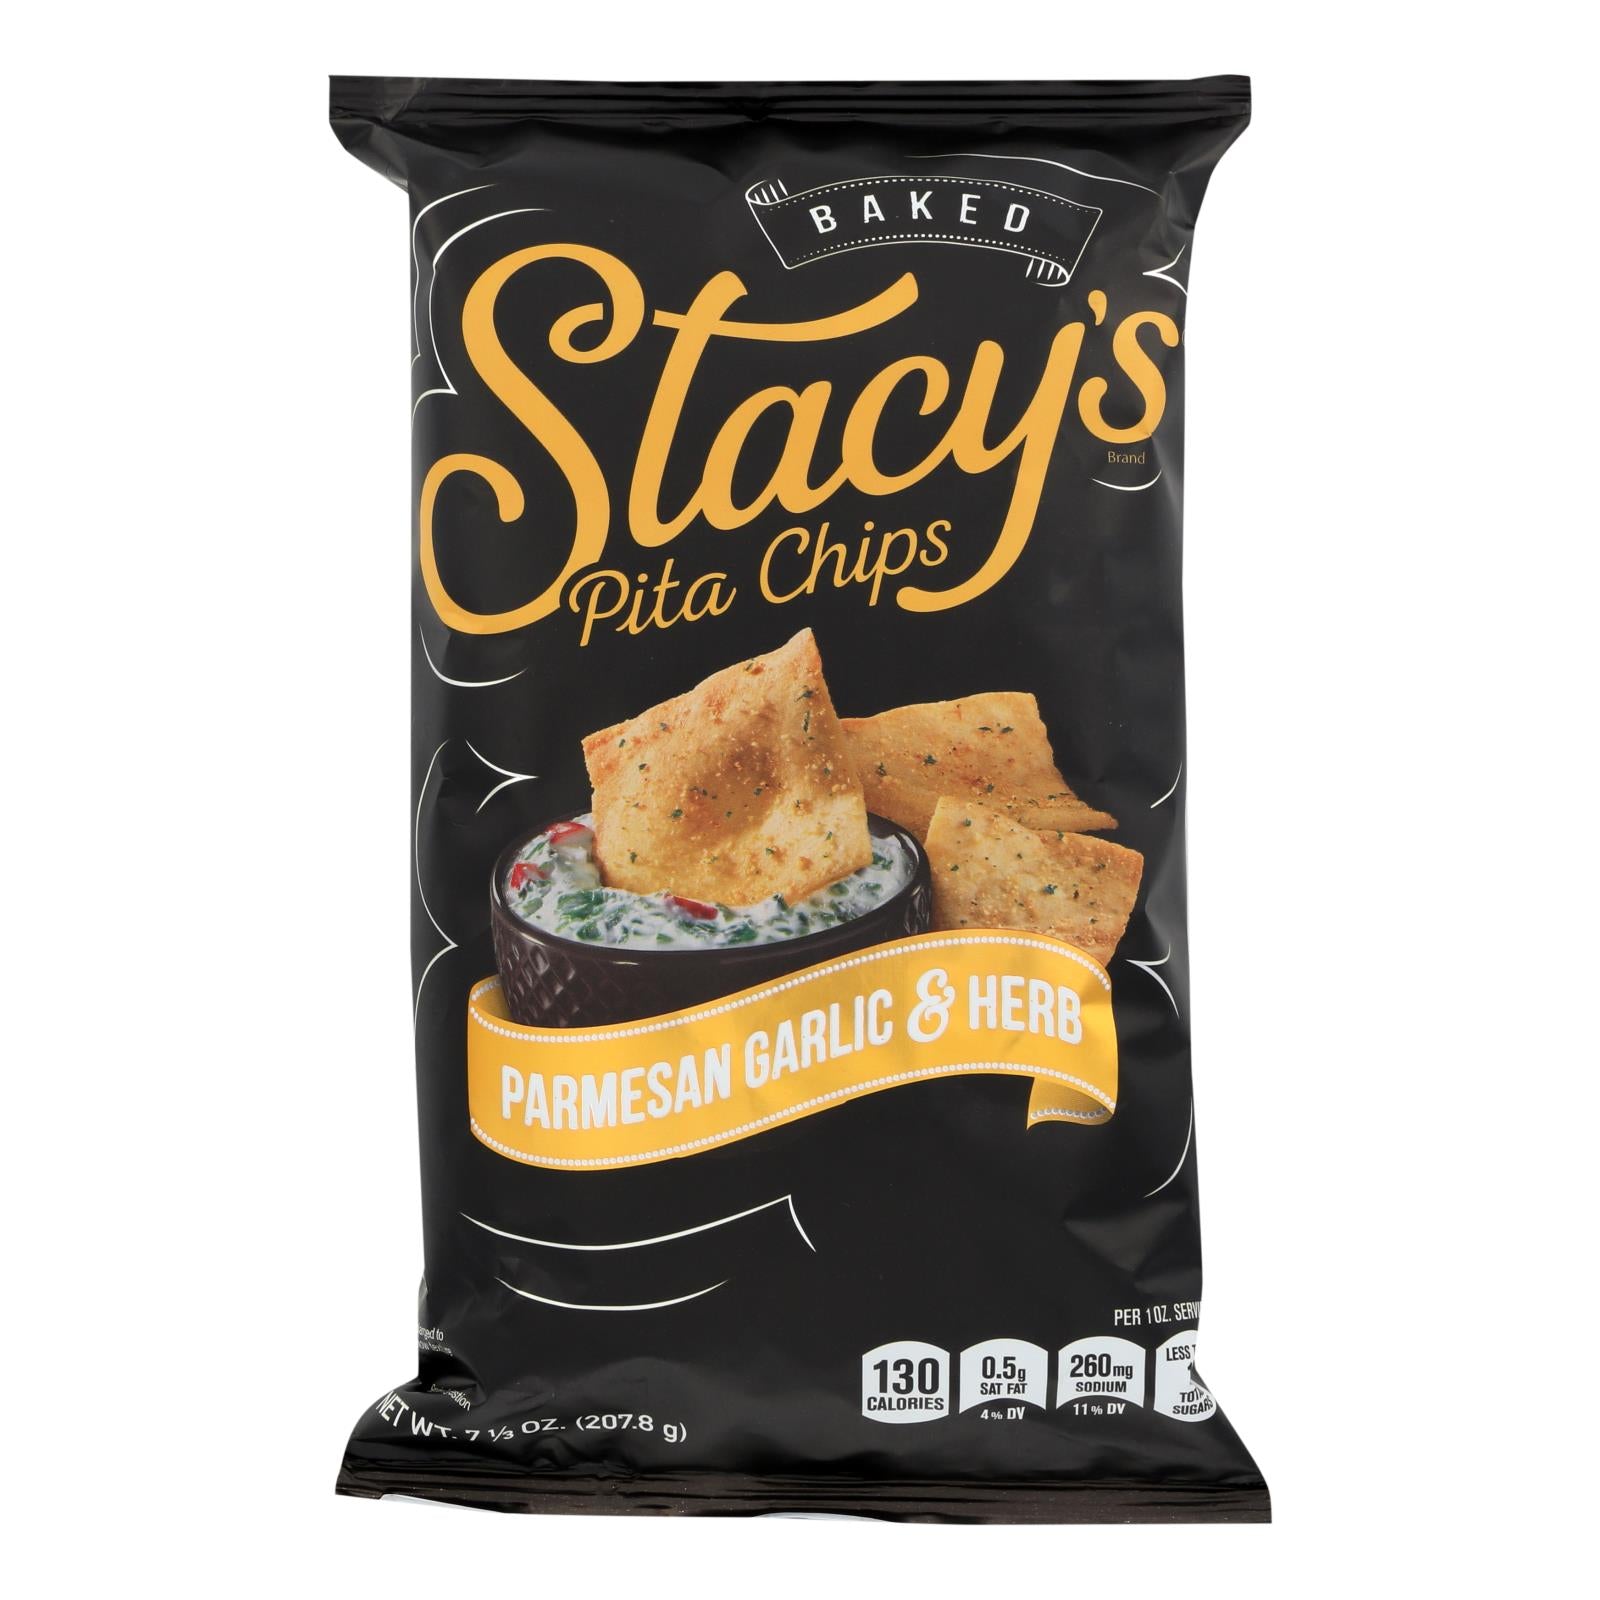 Stacy's Pita Chips Parmesan Garlic And Herb Pita Chips - Parmesan Garlic - Case Of 12 - 7.33 Oz.